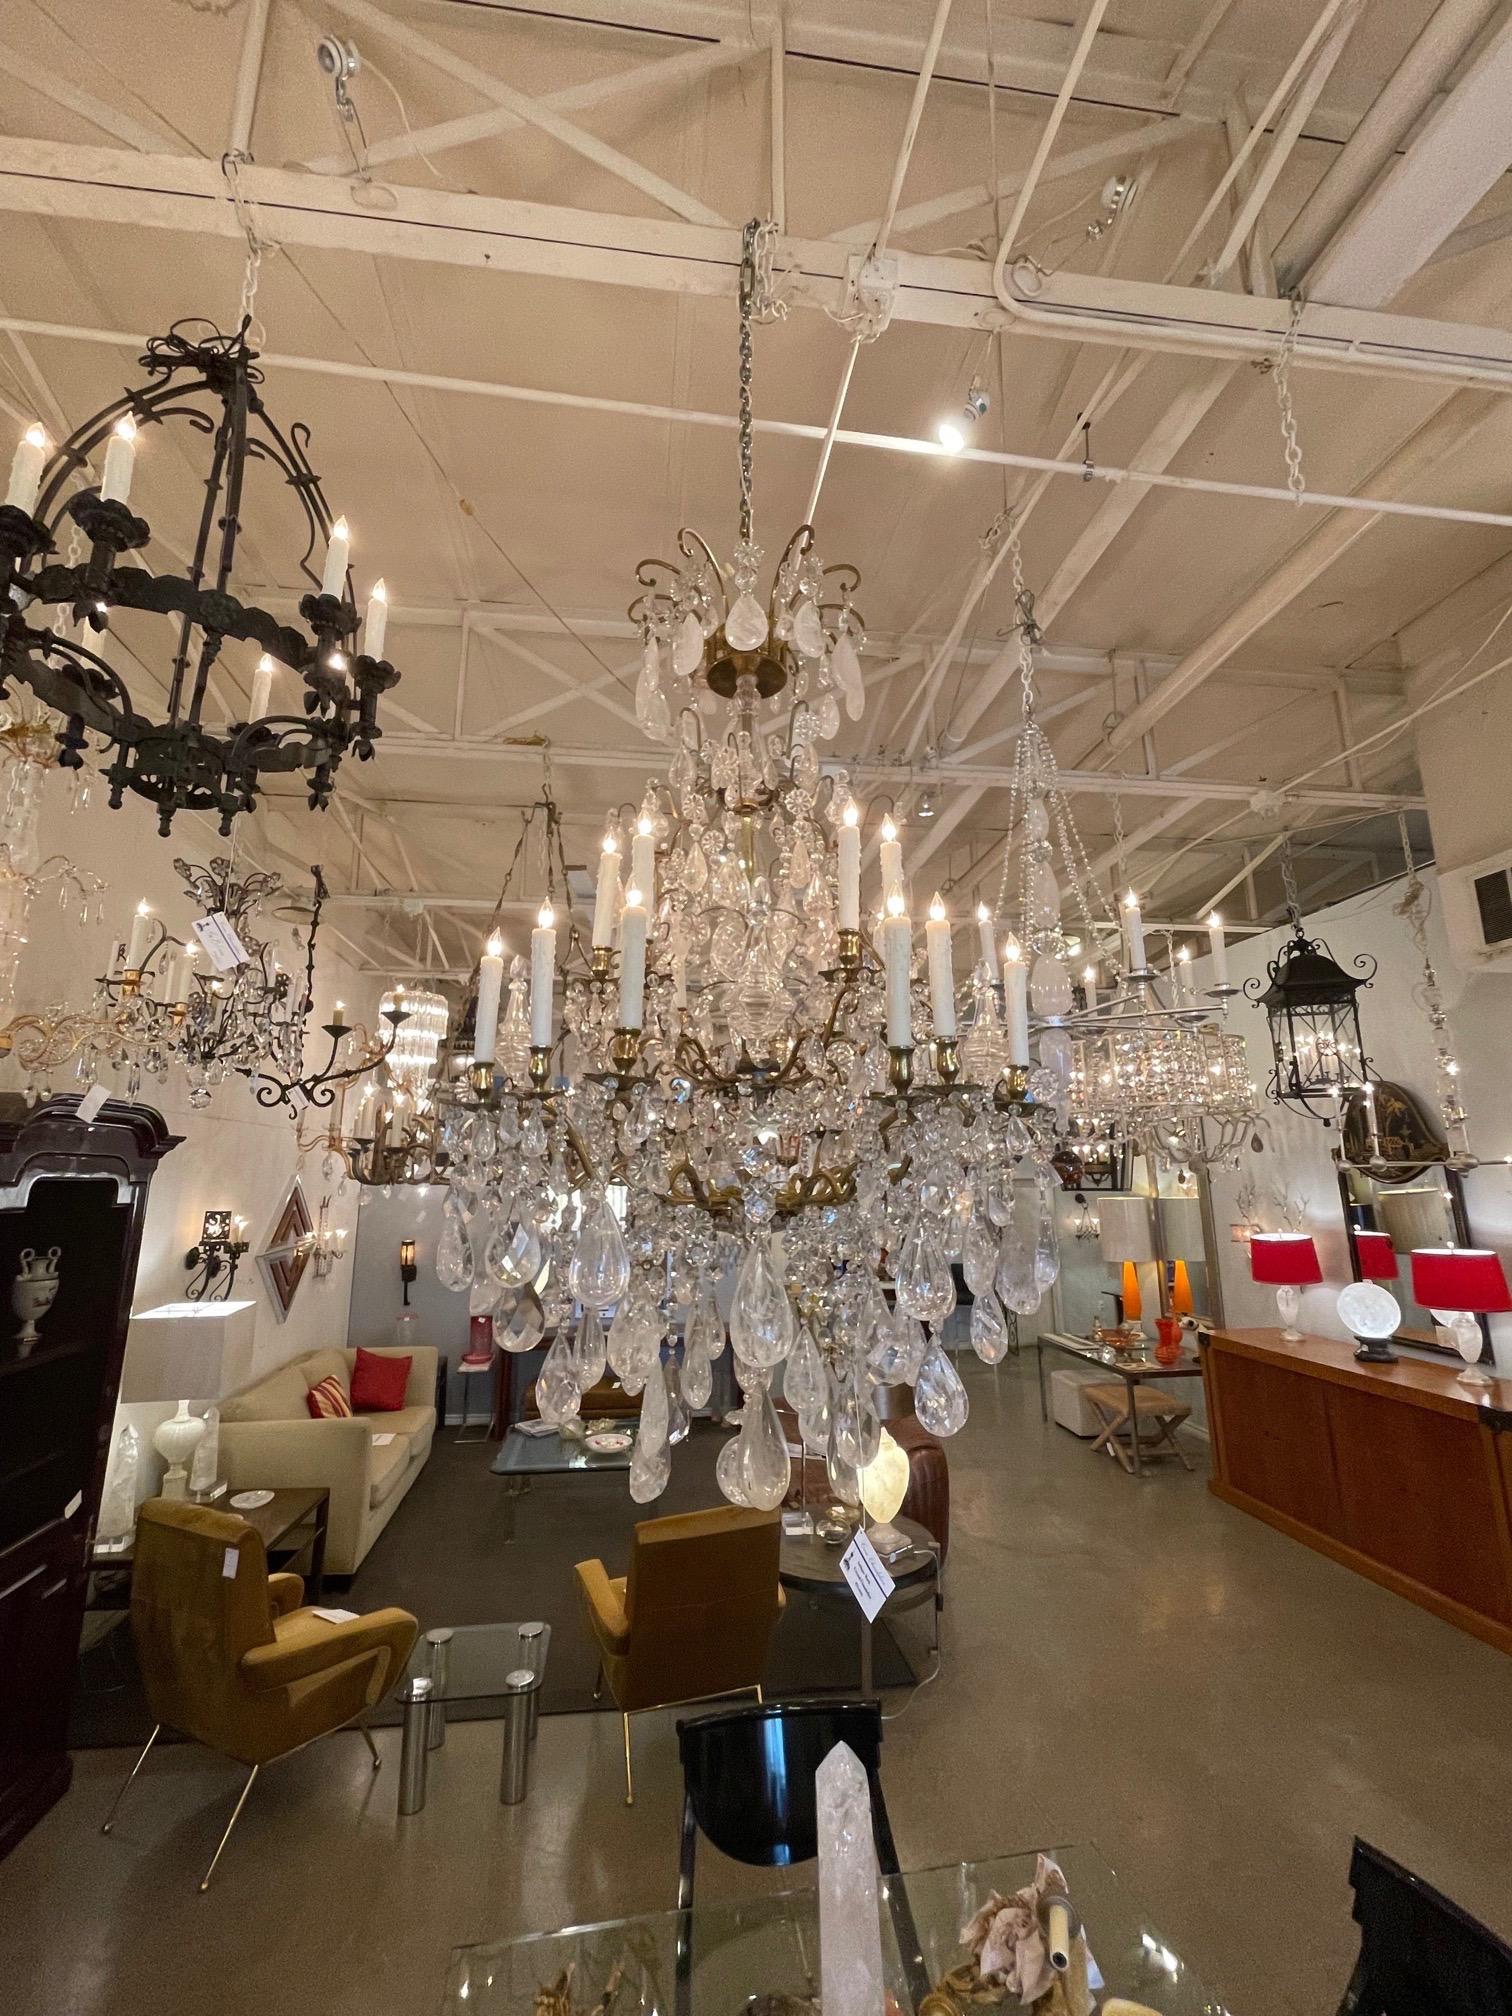 Large scale 19th century French bronze and rock crystal chandelier. Featuring a plethora of various sizes of beautiful rock crystal, some enormous. Very impressive!!